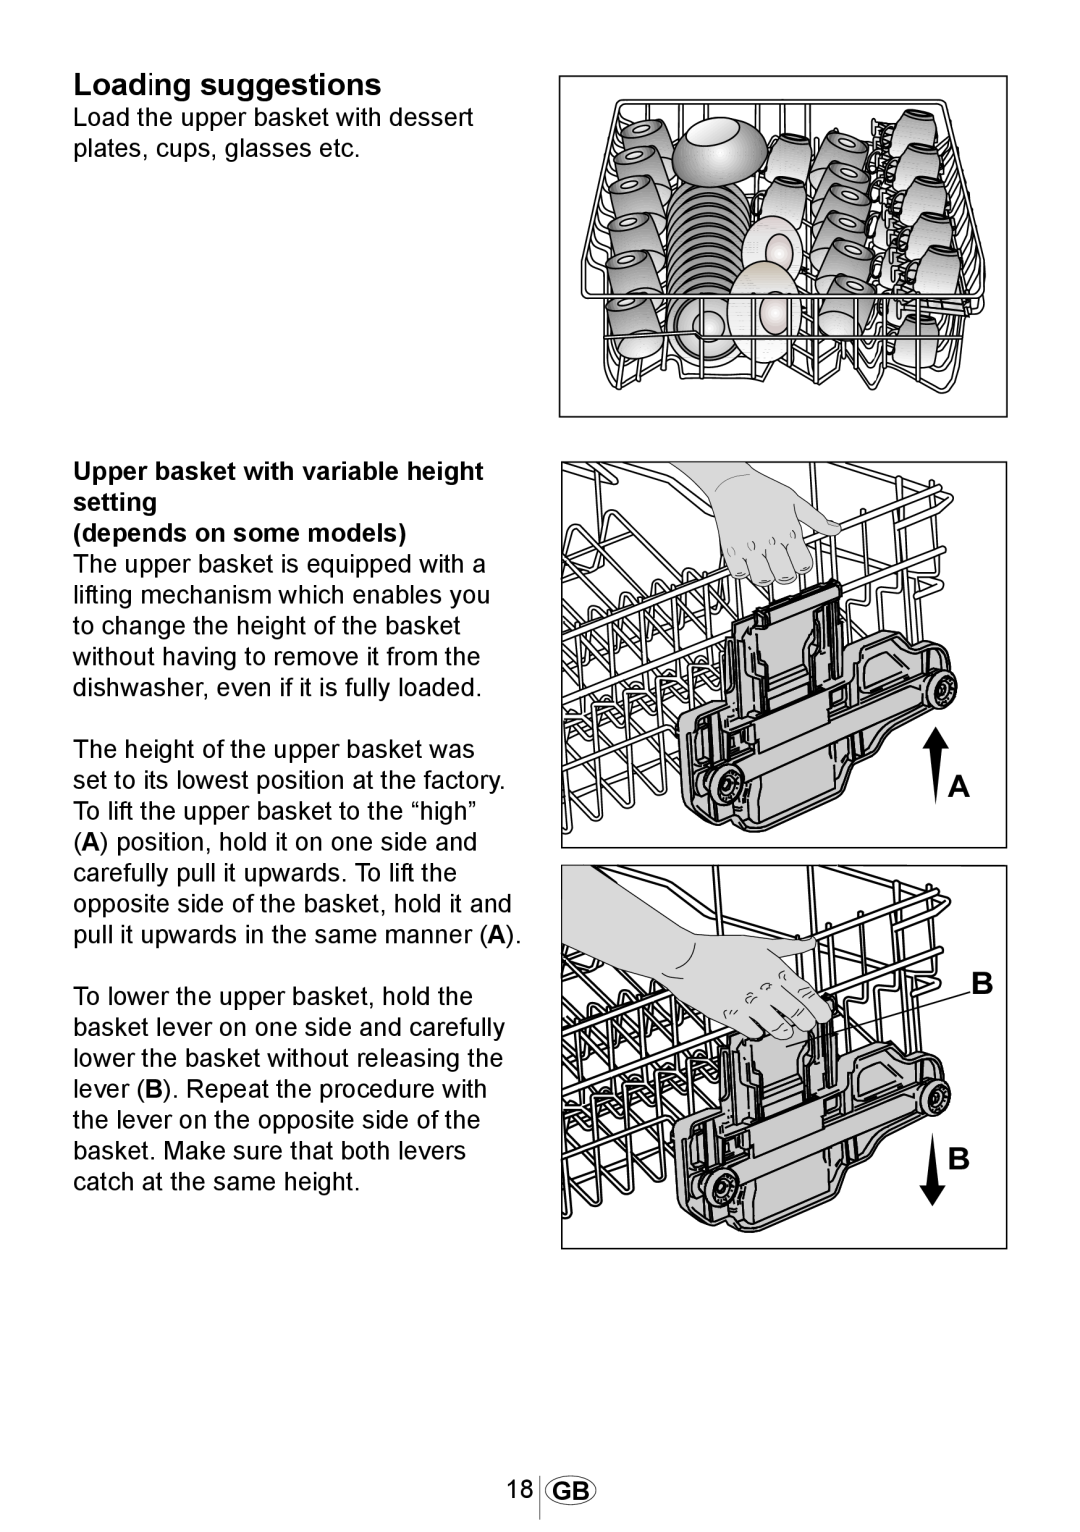 Beko 3905 MI instruction manual Loading suggestions, Upper basket with variable height setting depends on some models, 1021 